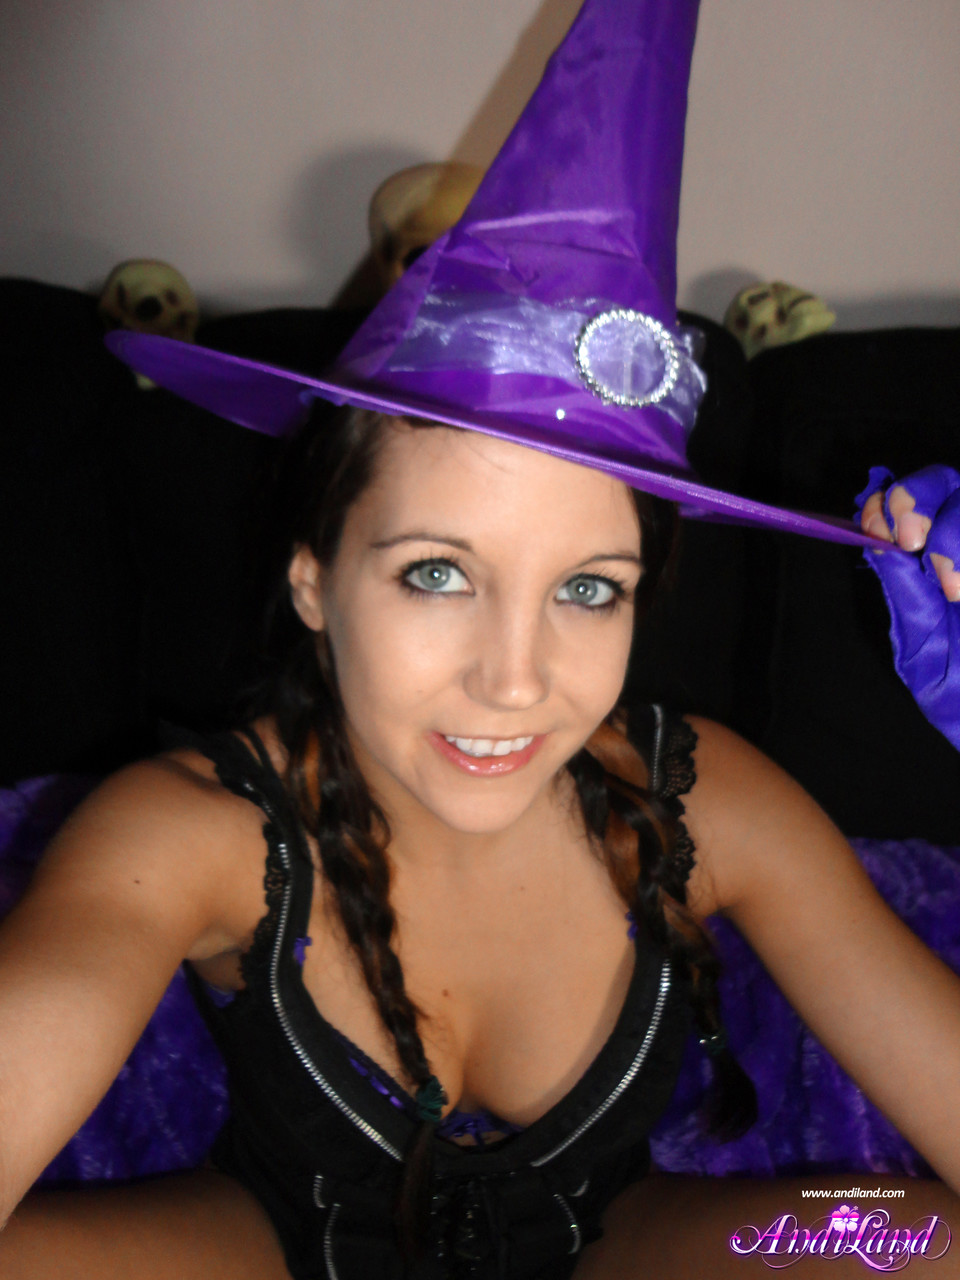 Teen amateur Andi Land teases during upskirt action in a Halloween outfit porno fotky #428432666 | Andi Land Pics, Andi Land, Cosplay, mobilní porno